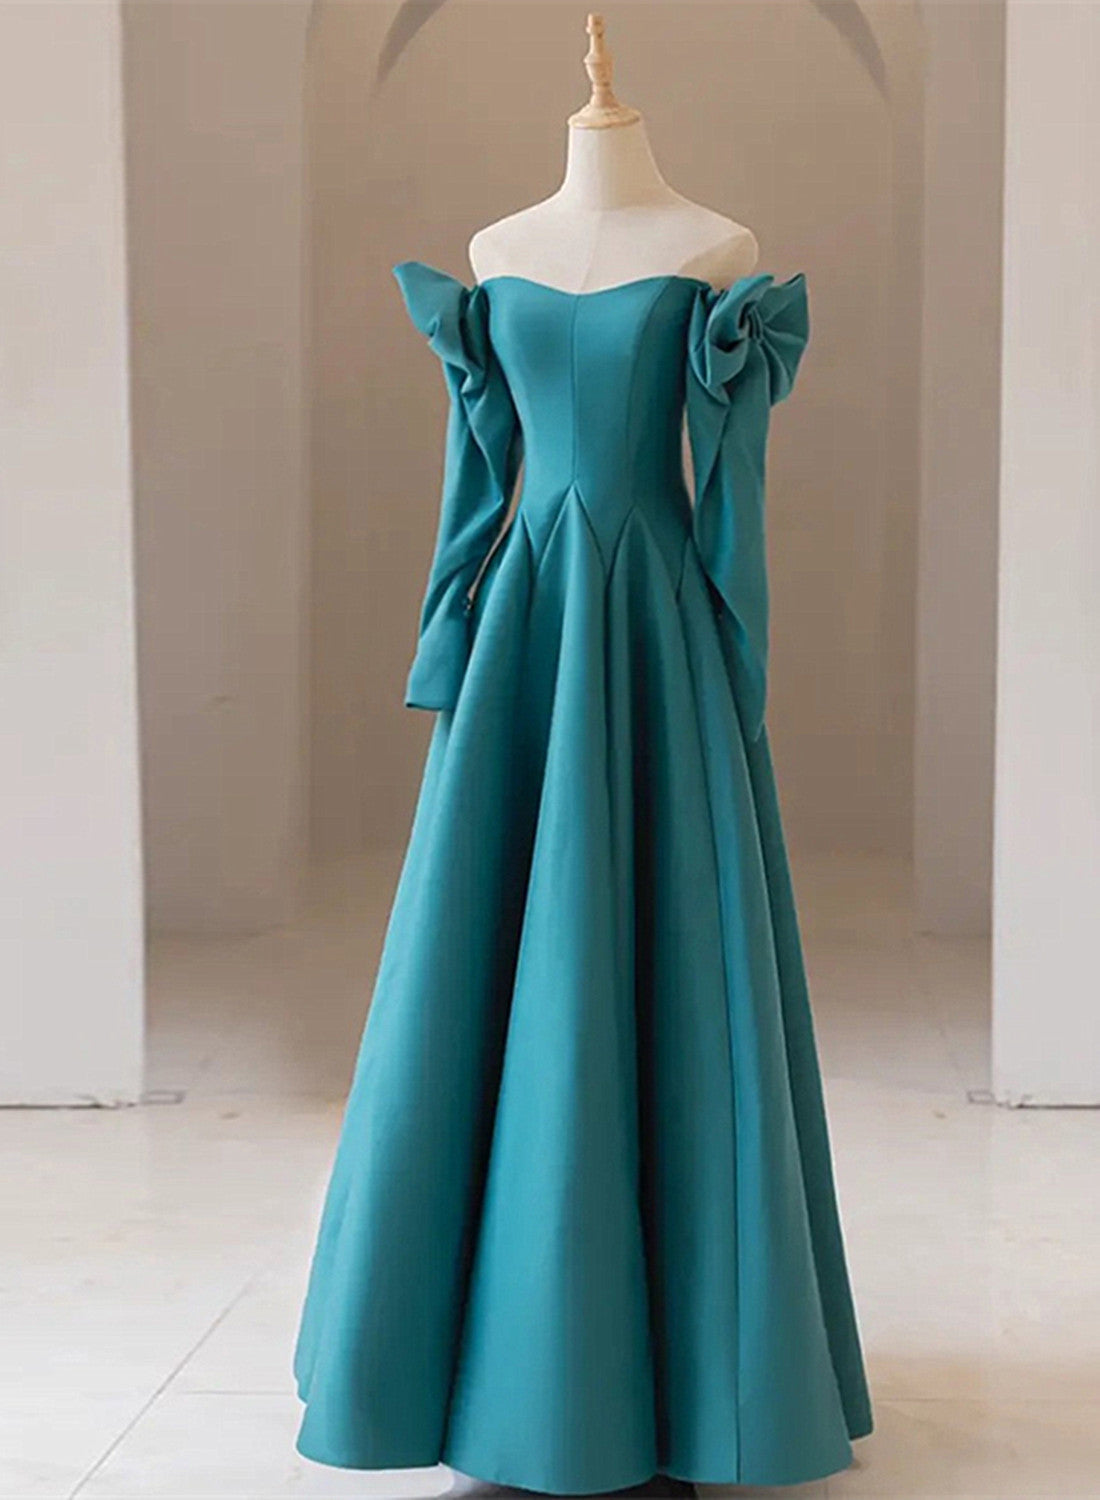 Formal Dresses Simple, Teal Blue Long Sleeves with Bow A-line Sweetheart Prom Dress, Teal Blue Evening Dress